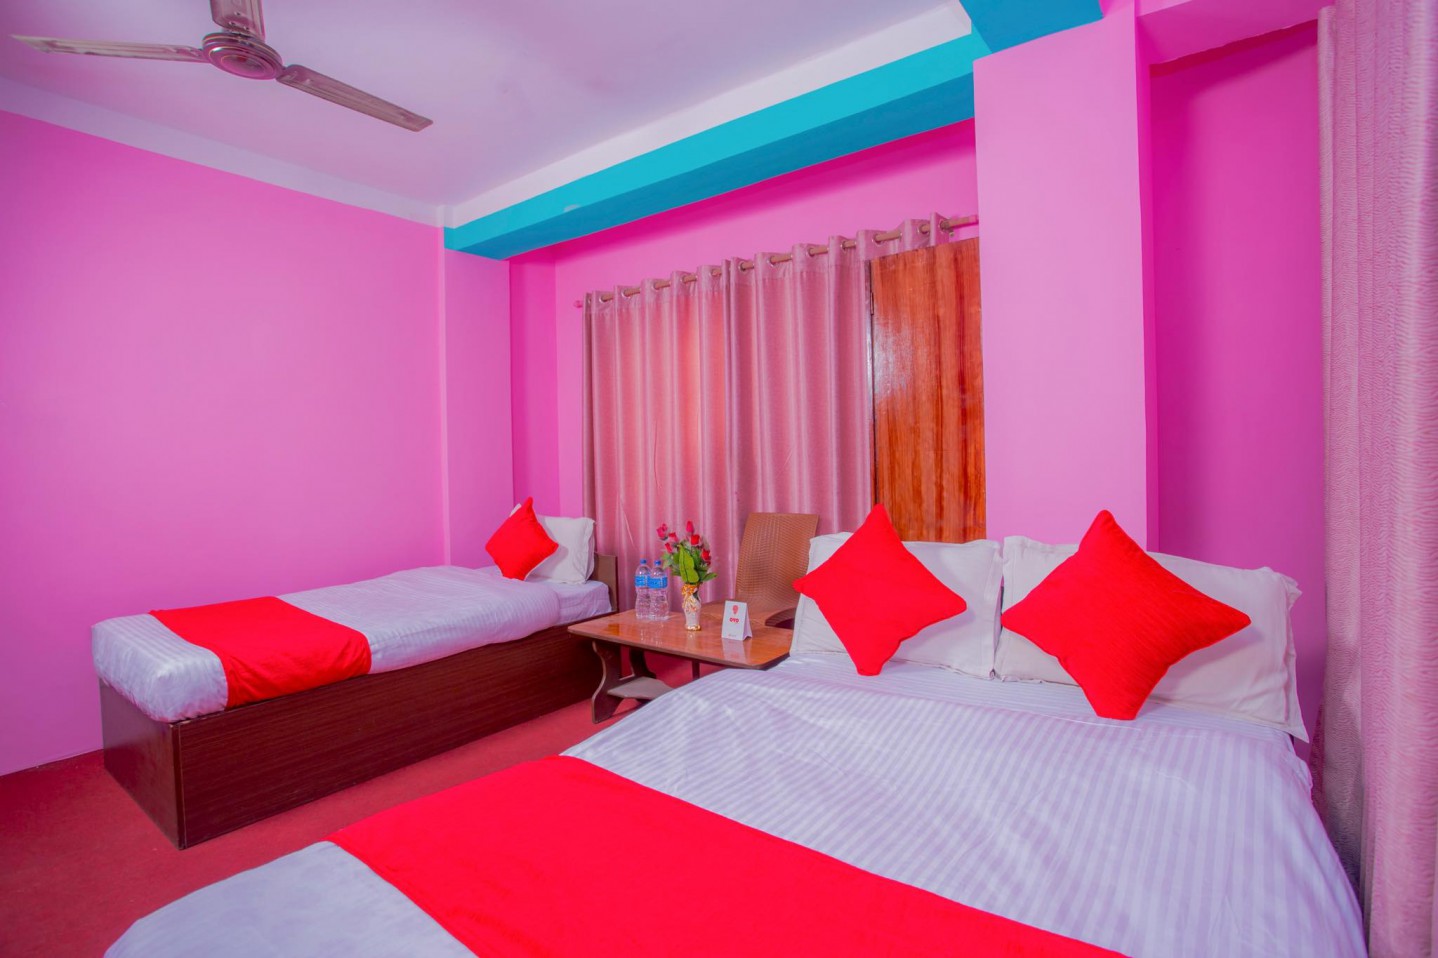 Sayapatri Guest House beds for guest